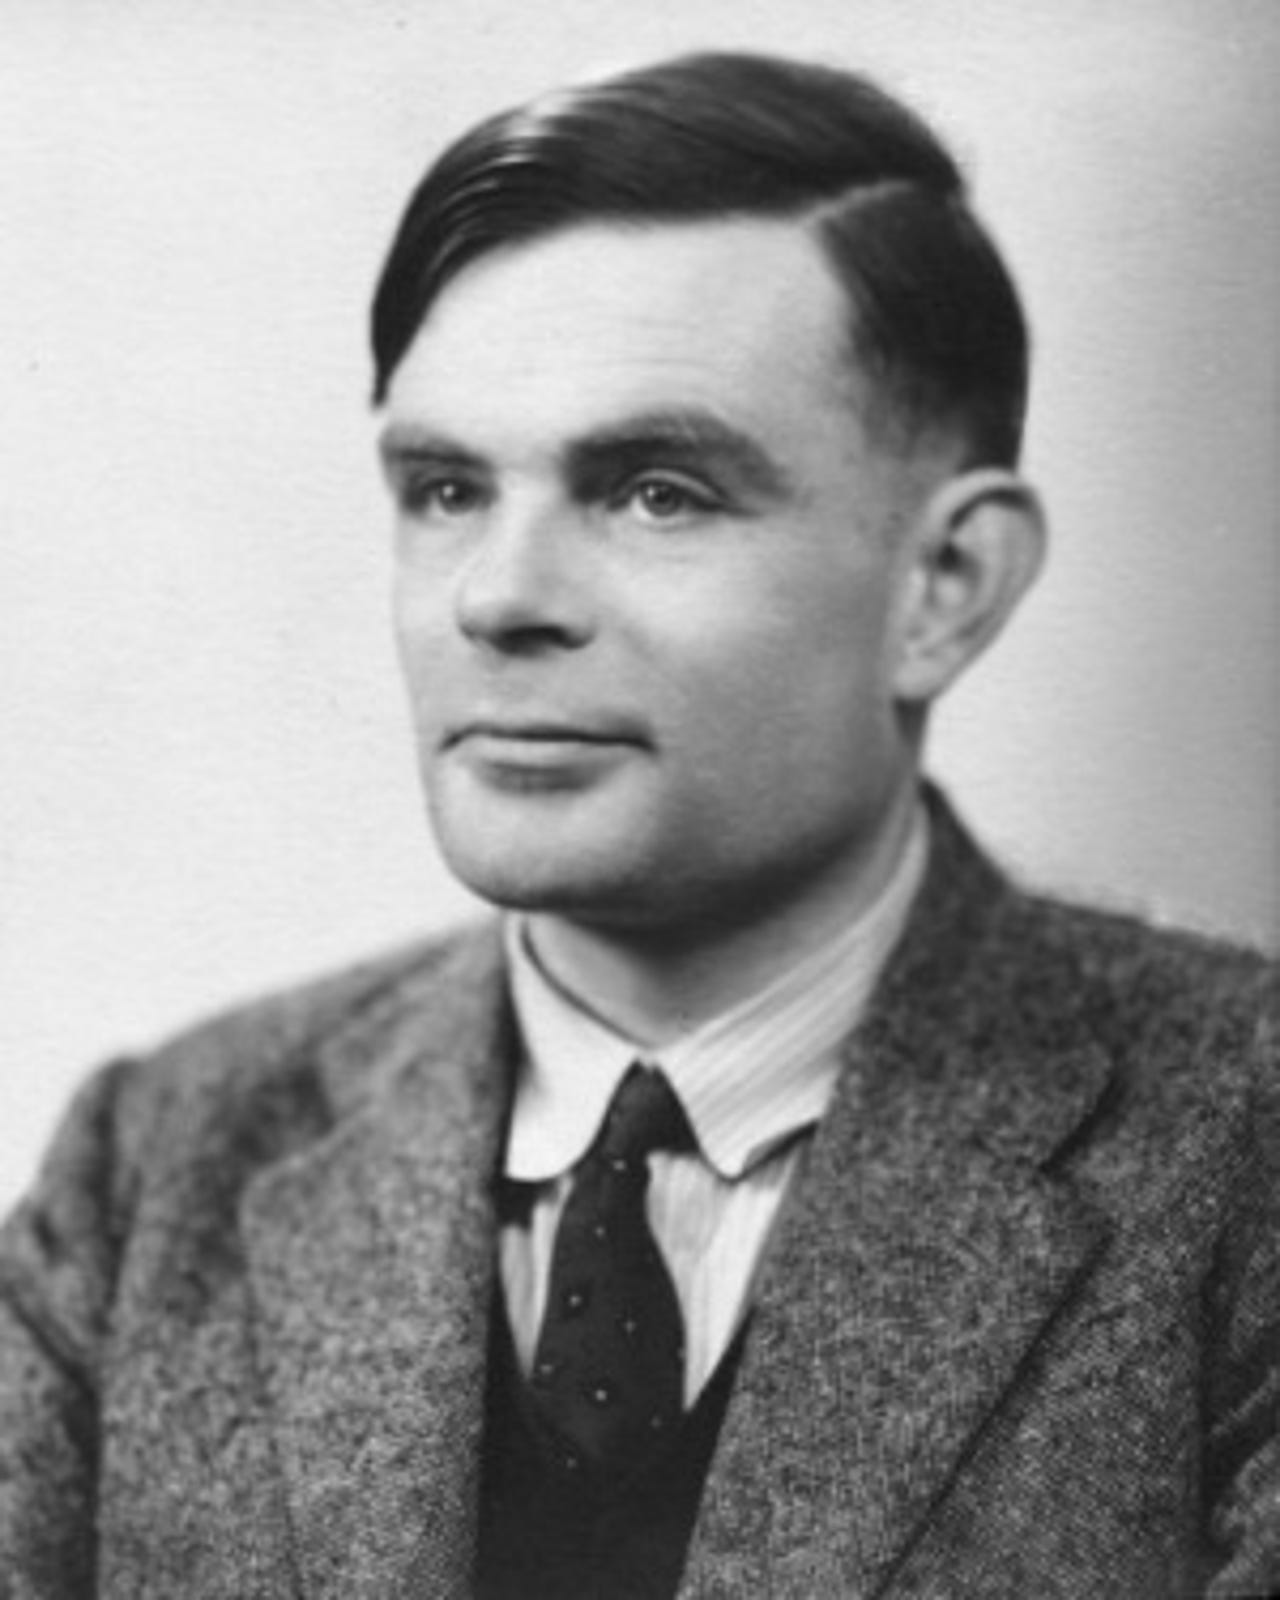 Alan Turing: The Enigma - IEEE Technology and Society